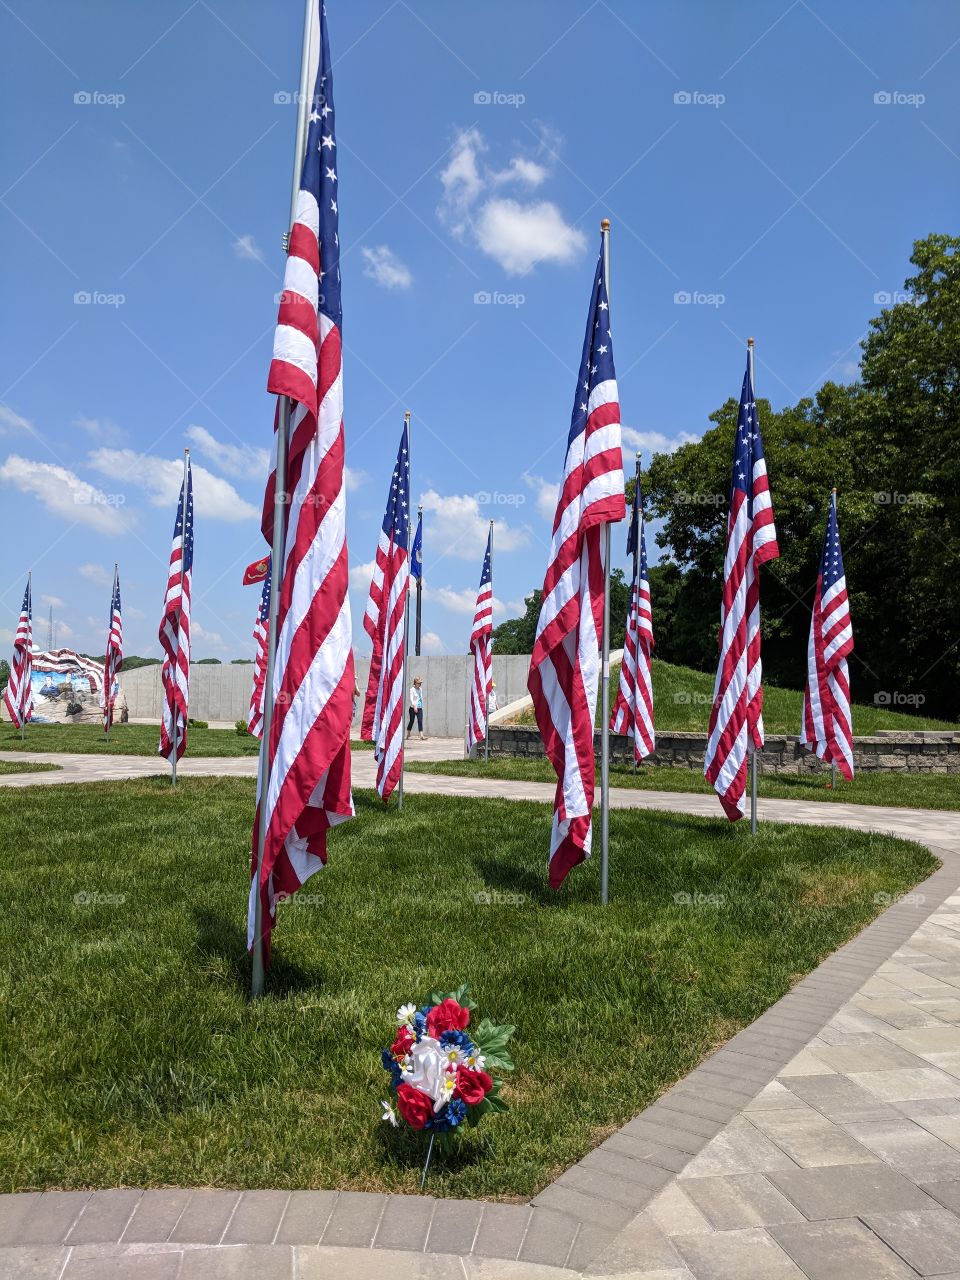 Avenue of Flags, memorial day